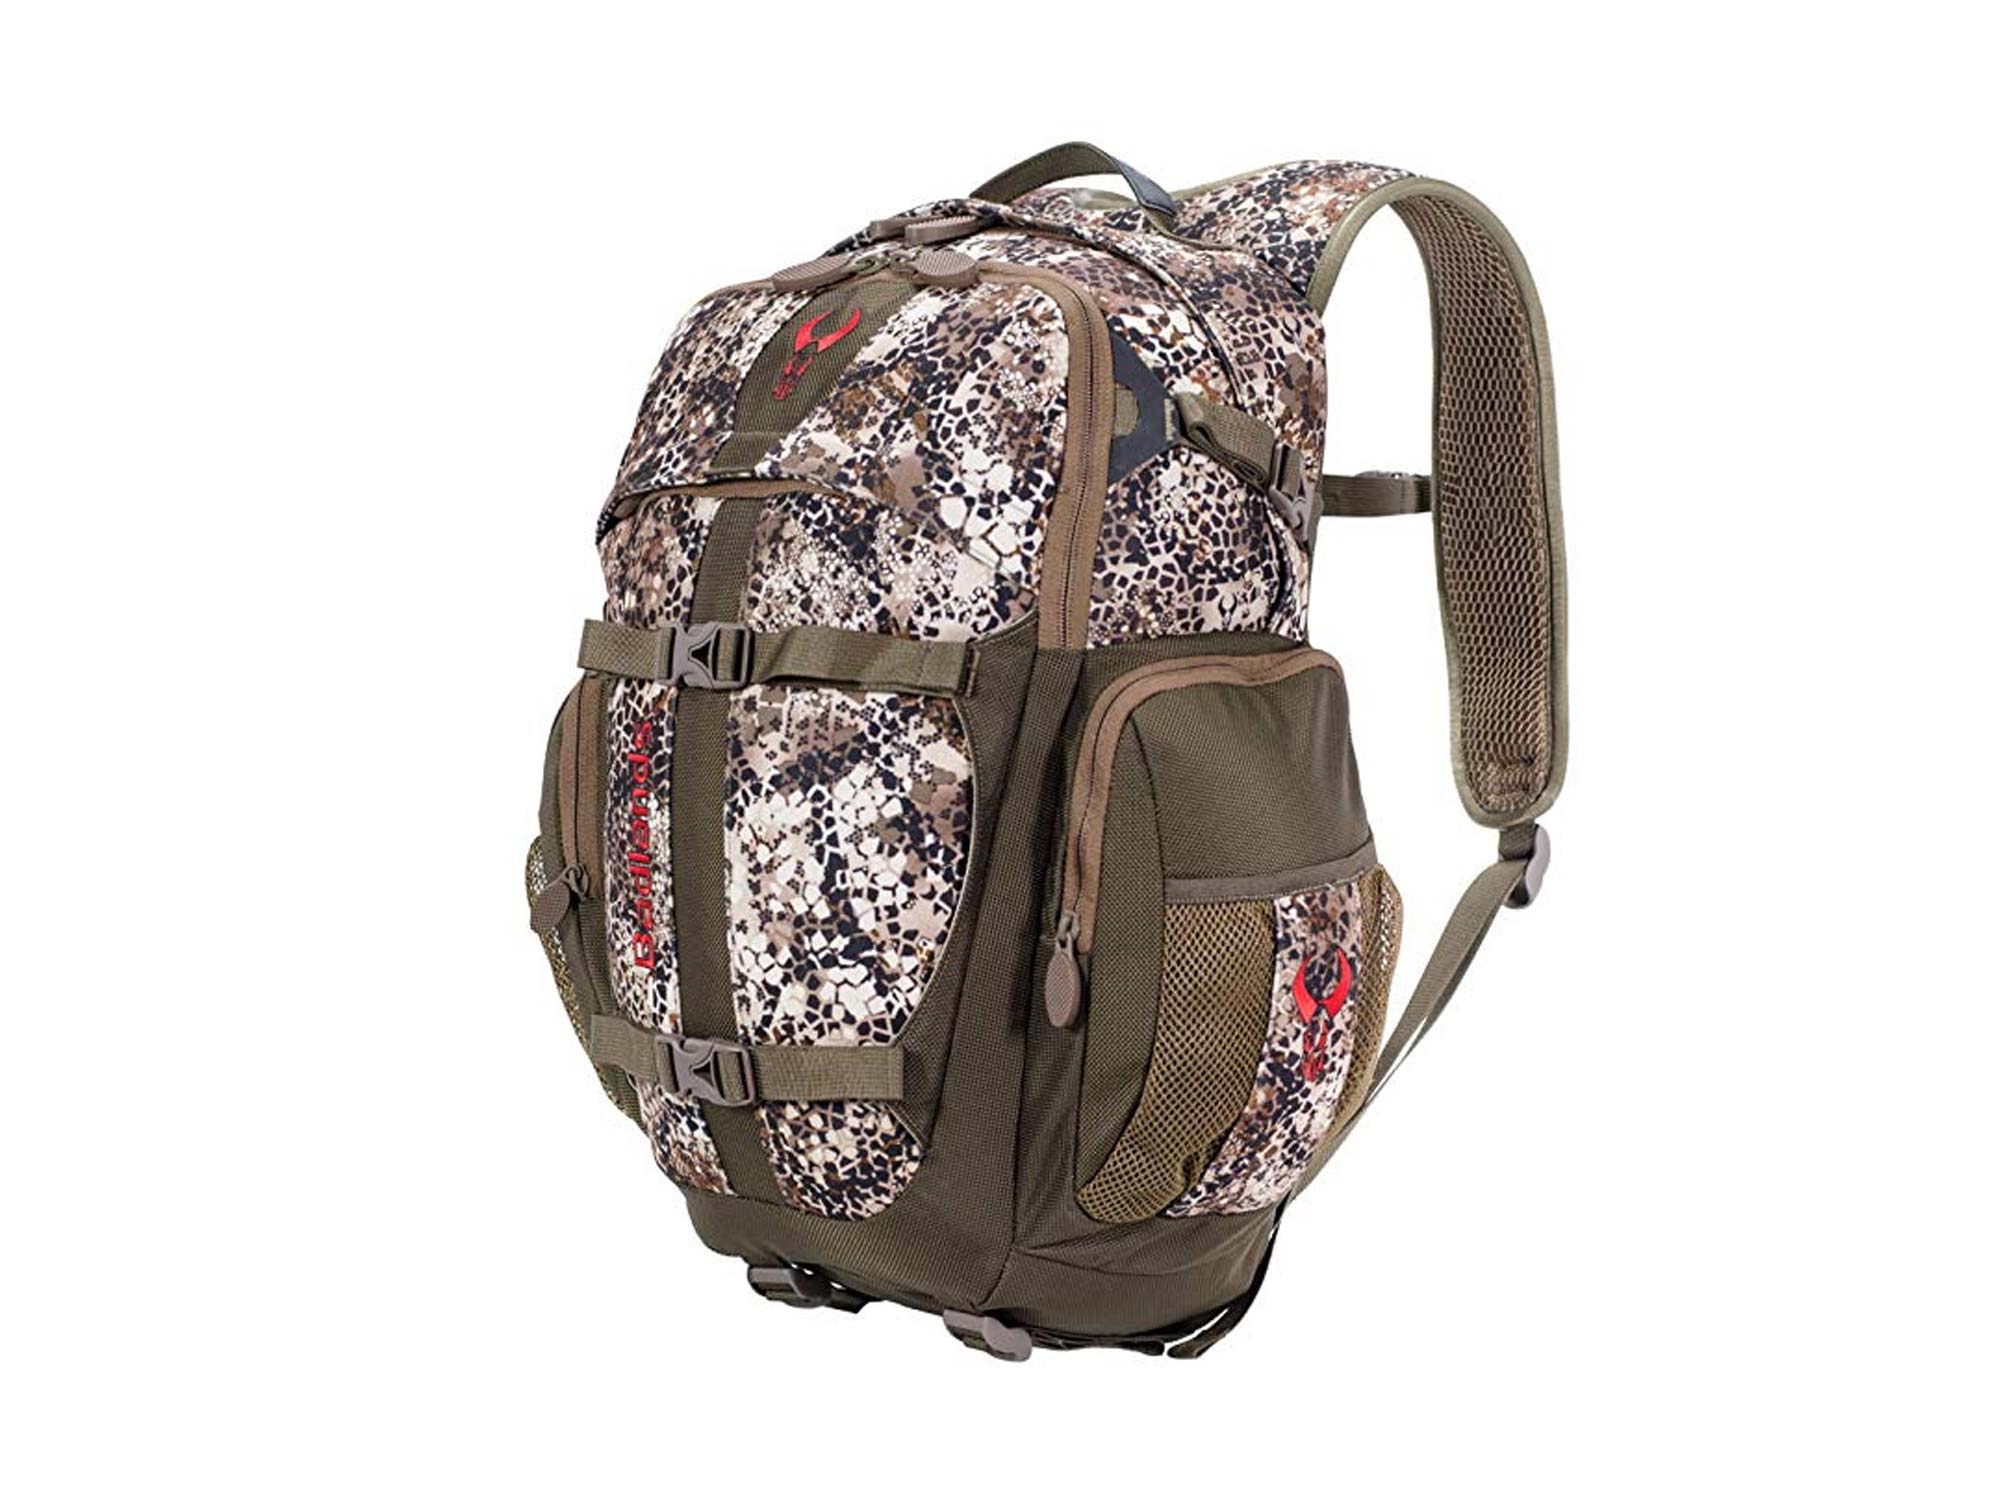 Badlands Pursuit Camouflage Hunting Day Pack - Bow and Rifle Compatible